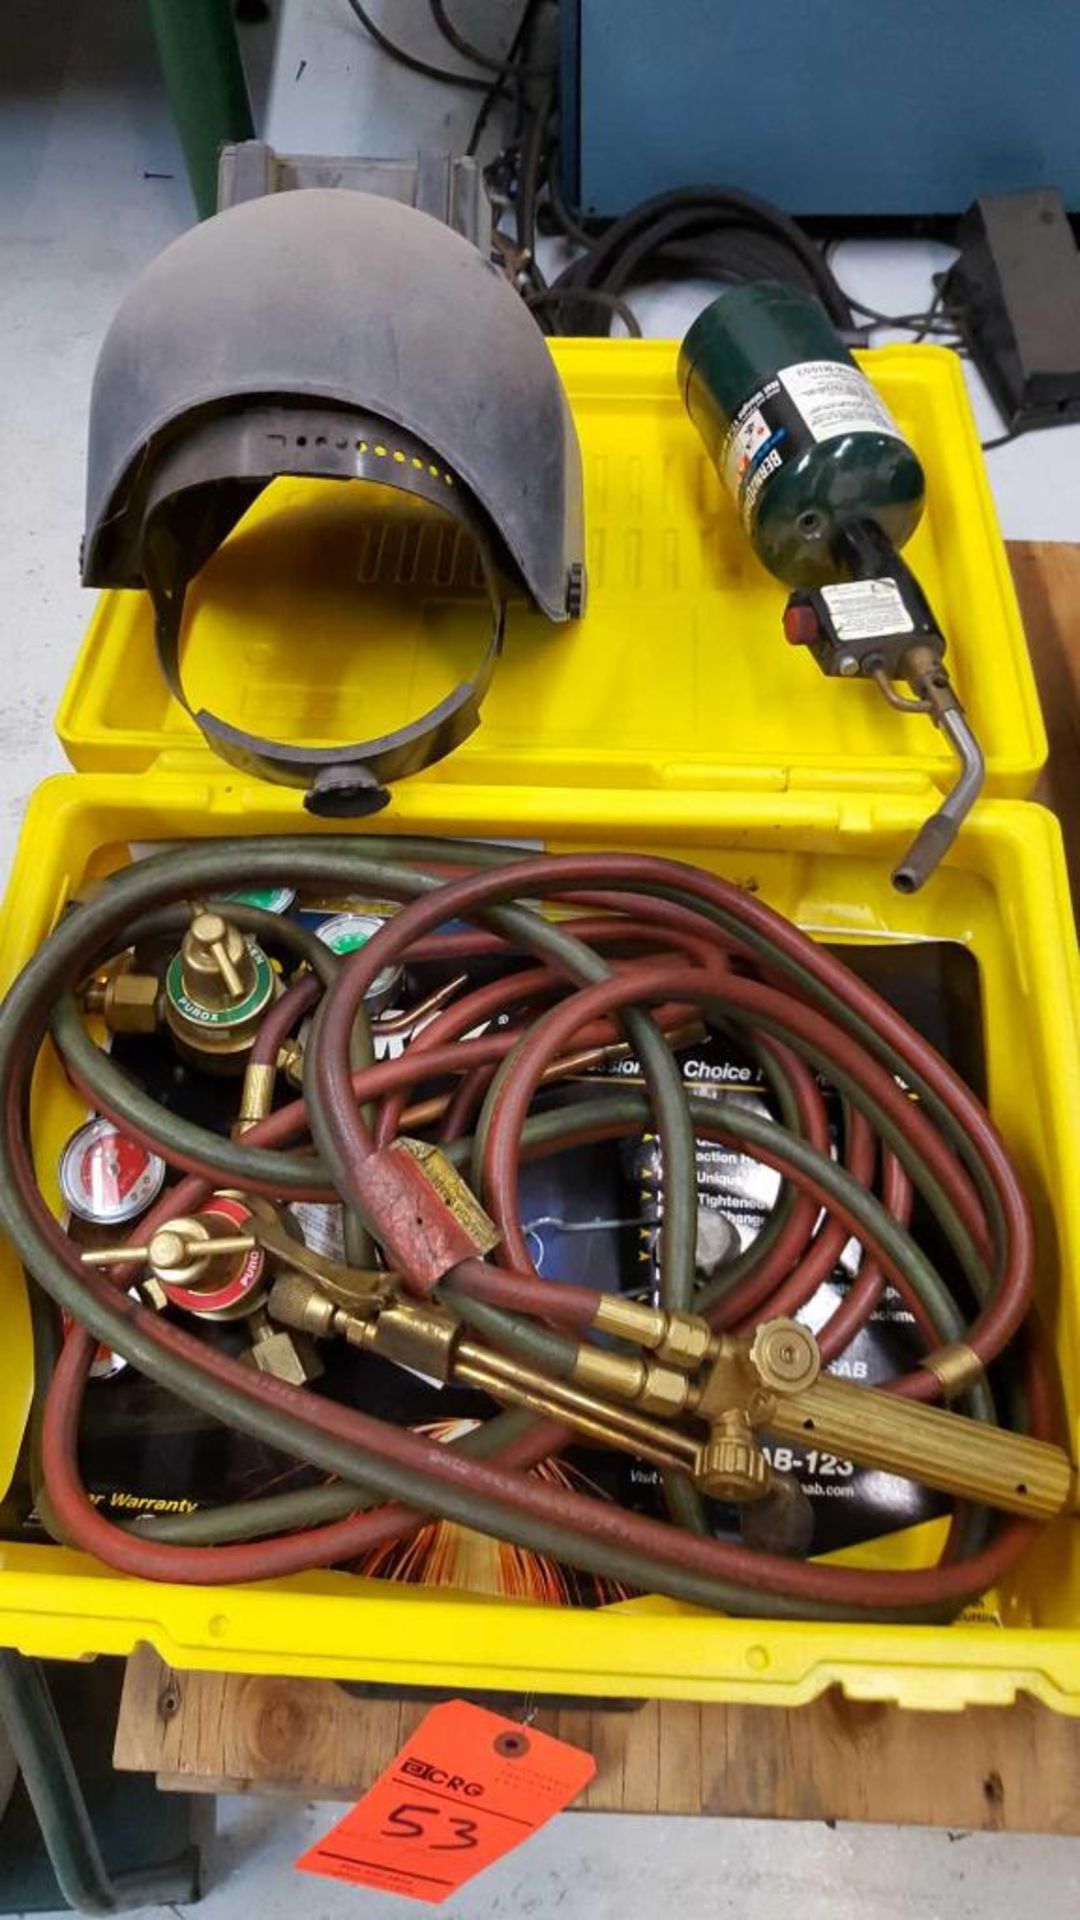 Lot of assorted cut and weld supplies including cart, torches, regulators, mask, and gloves - Image 2 of 3